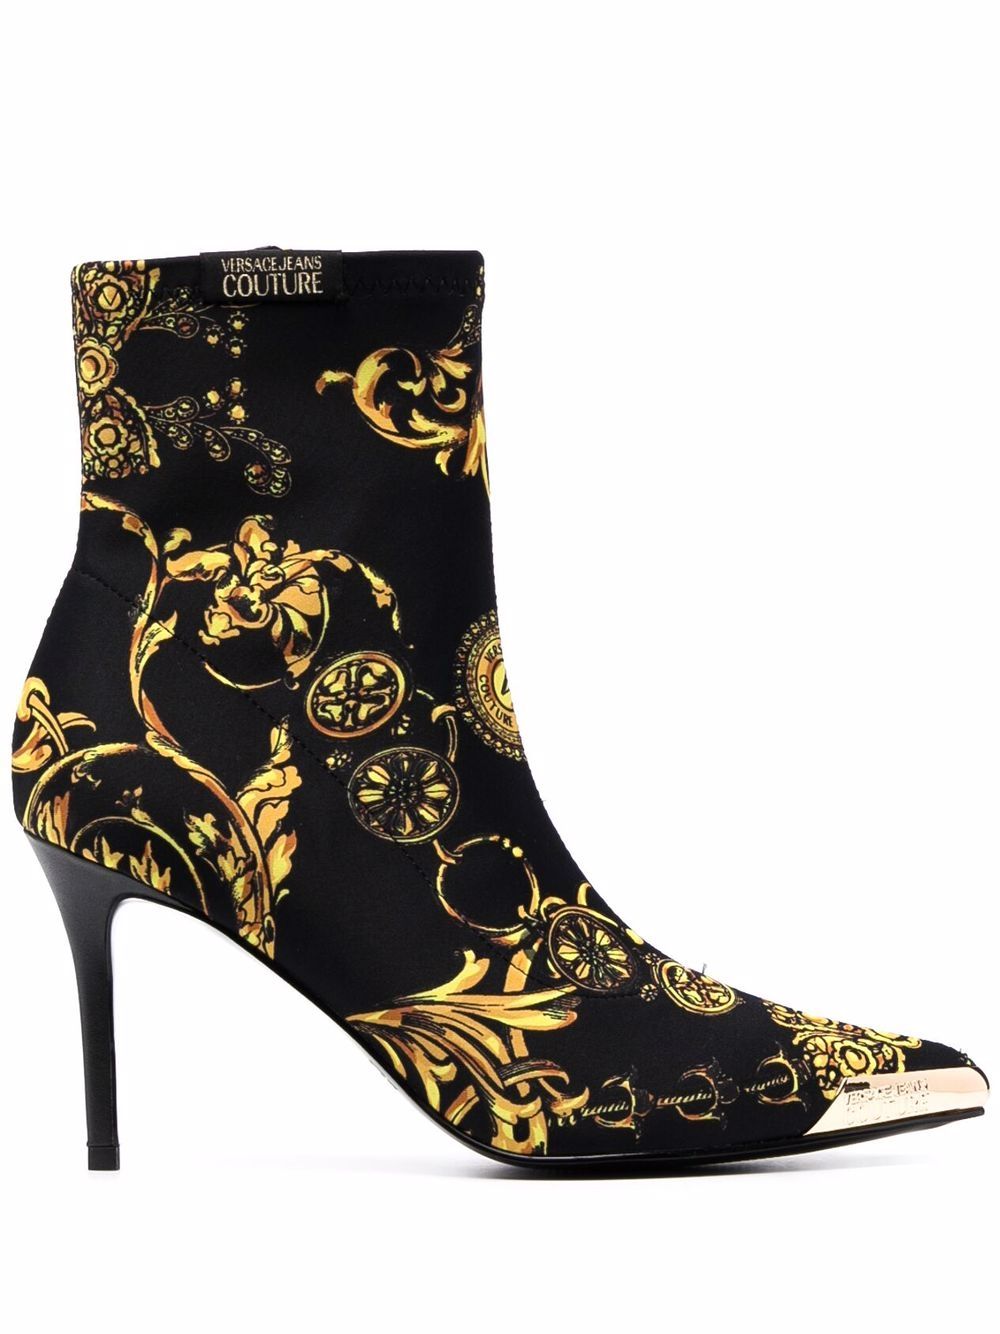 VERSACE WOMEN Baroque-pattern ankle boots Black/Gold